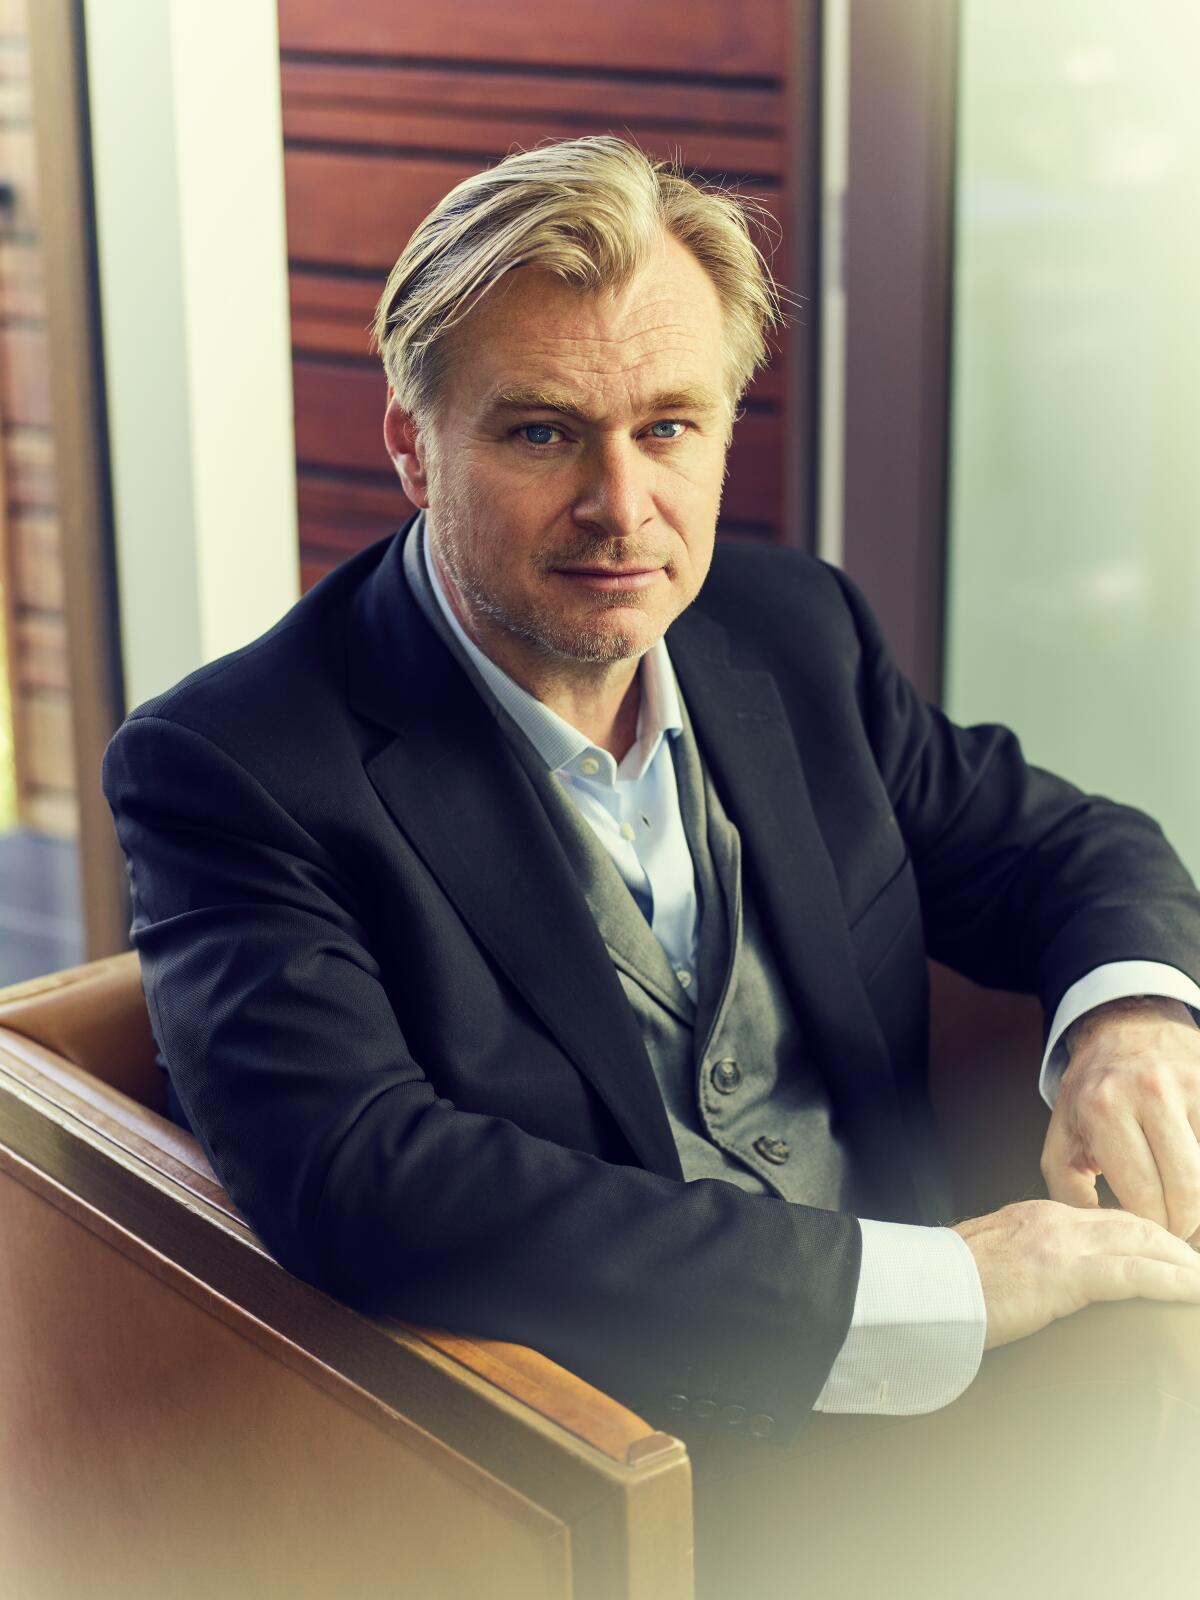 Christopher Nolan's New Film: Behind His Pitch to Studios (Including Apple)  – The Hollywood Reporter